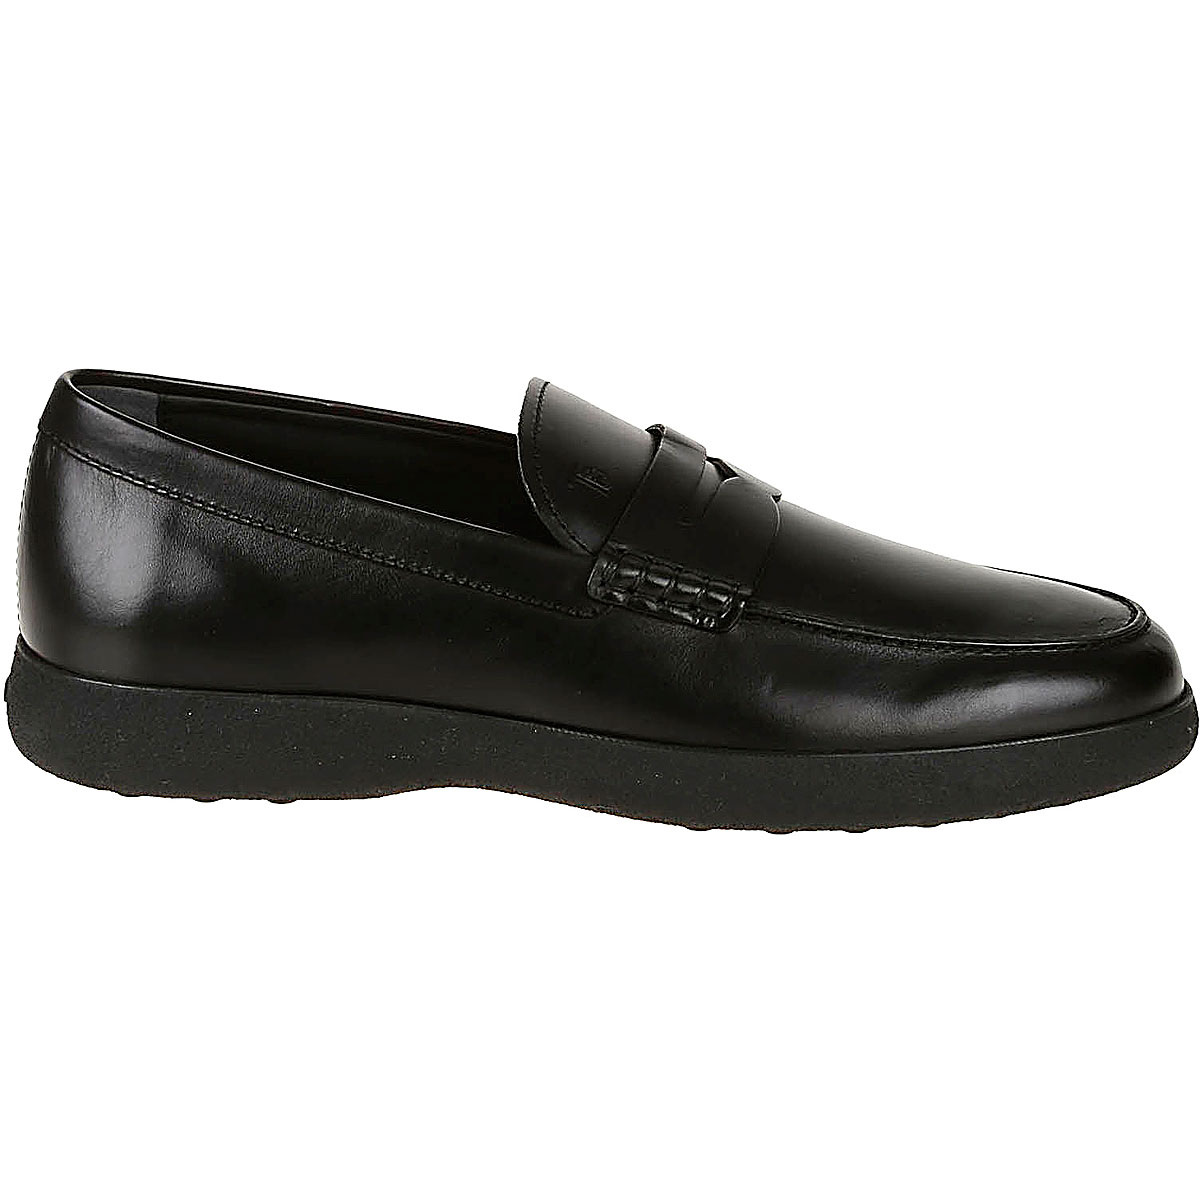 Mens Shoes Tods, Style code: xxm67k00010nf5b999--